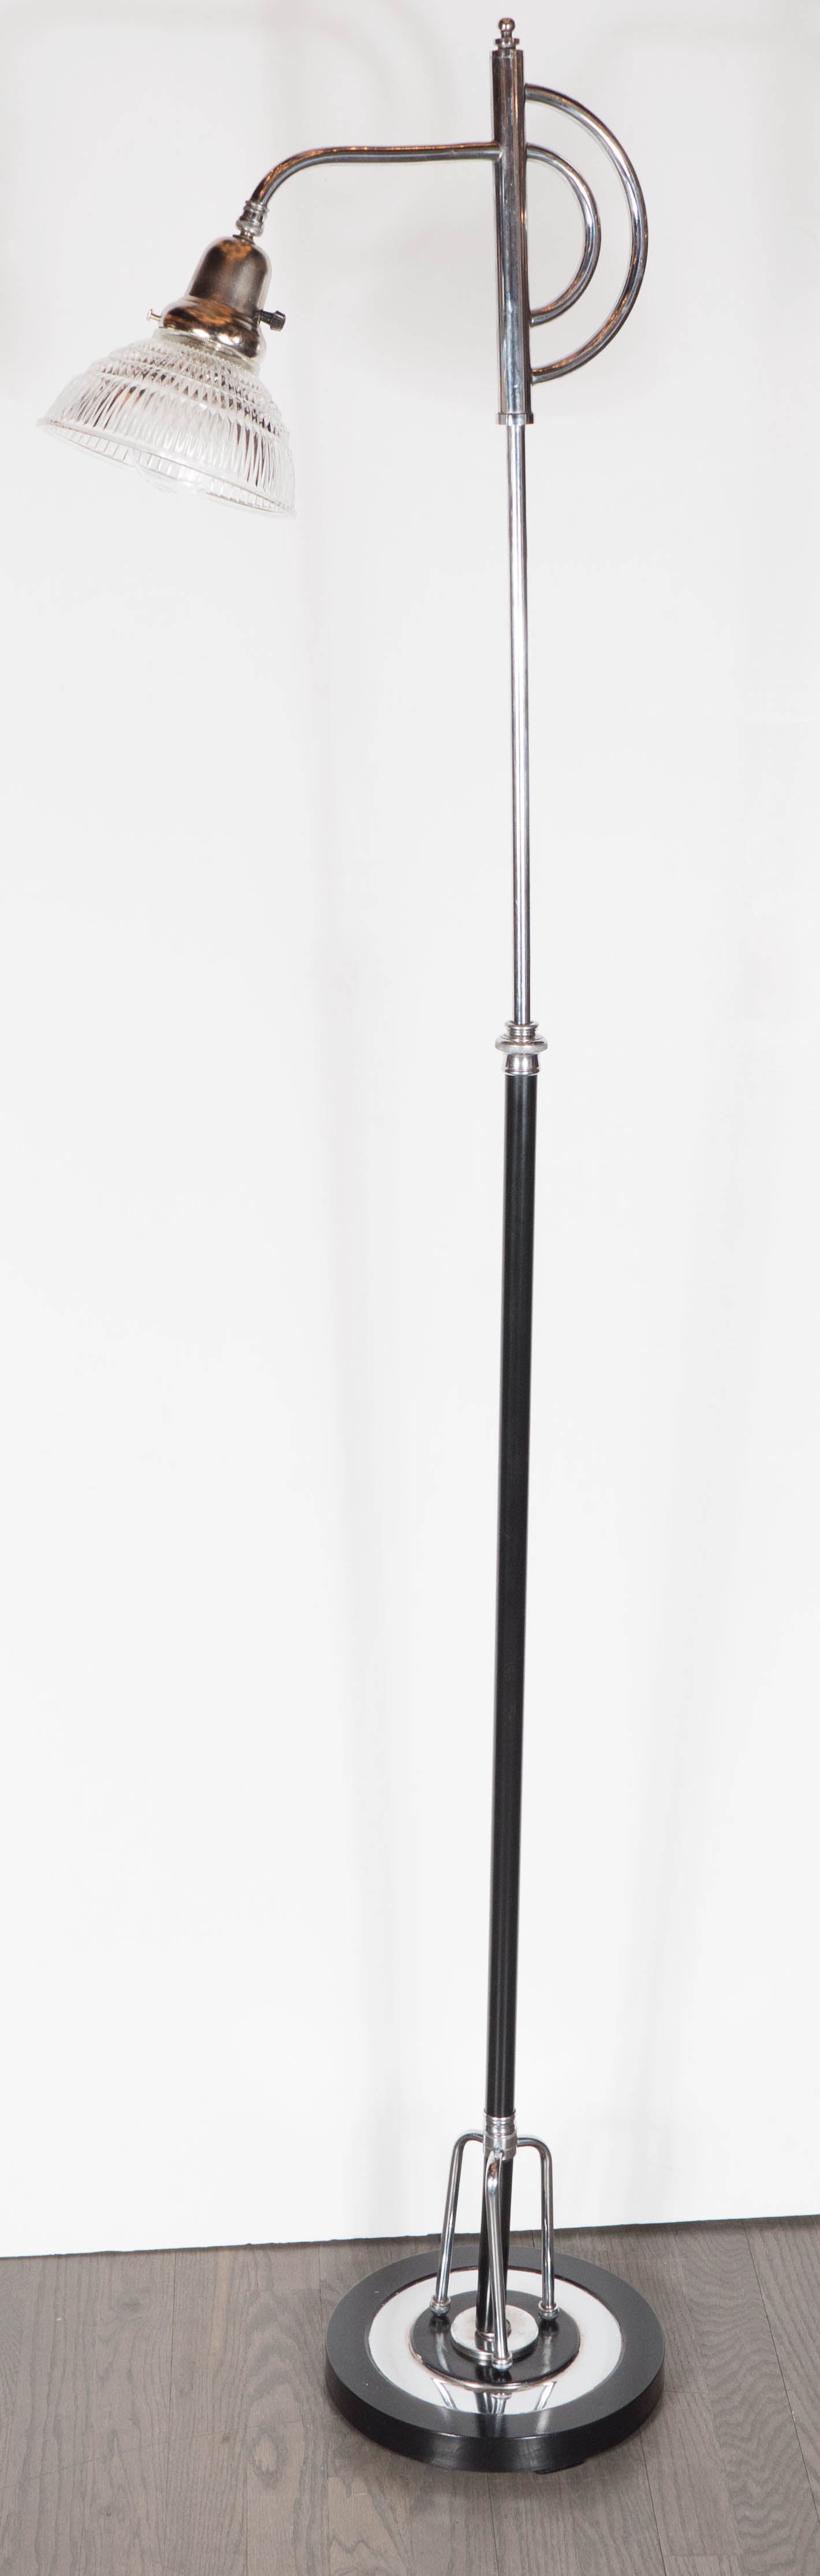 Art Deco Machine Age Floor Lamp in Chrome, Black Enamel and Ribbed Glass Shade